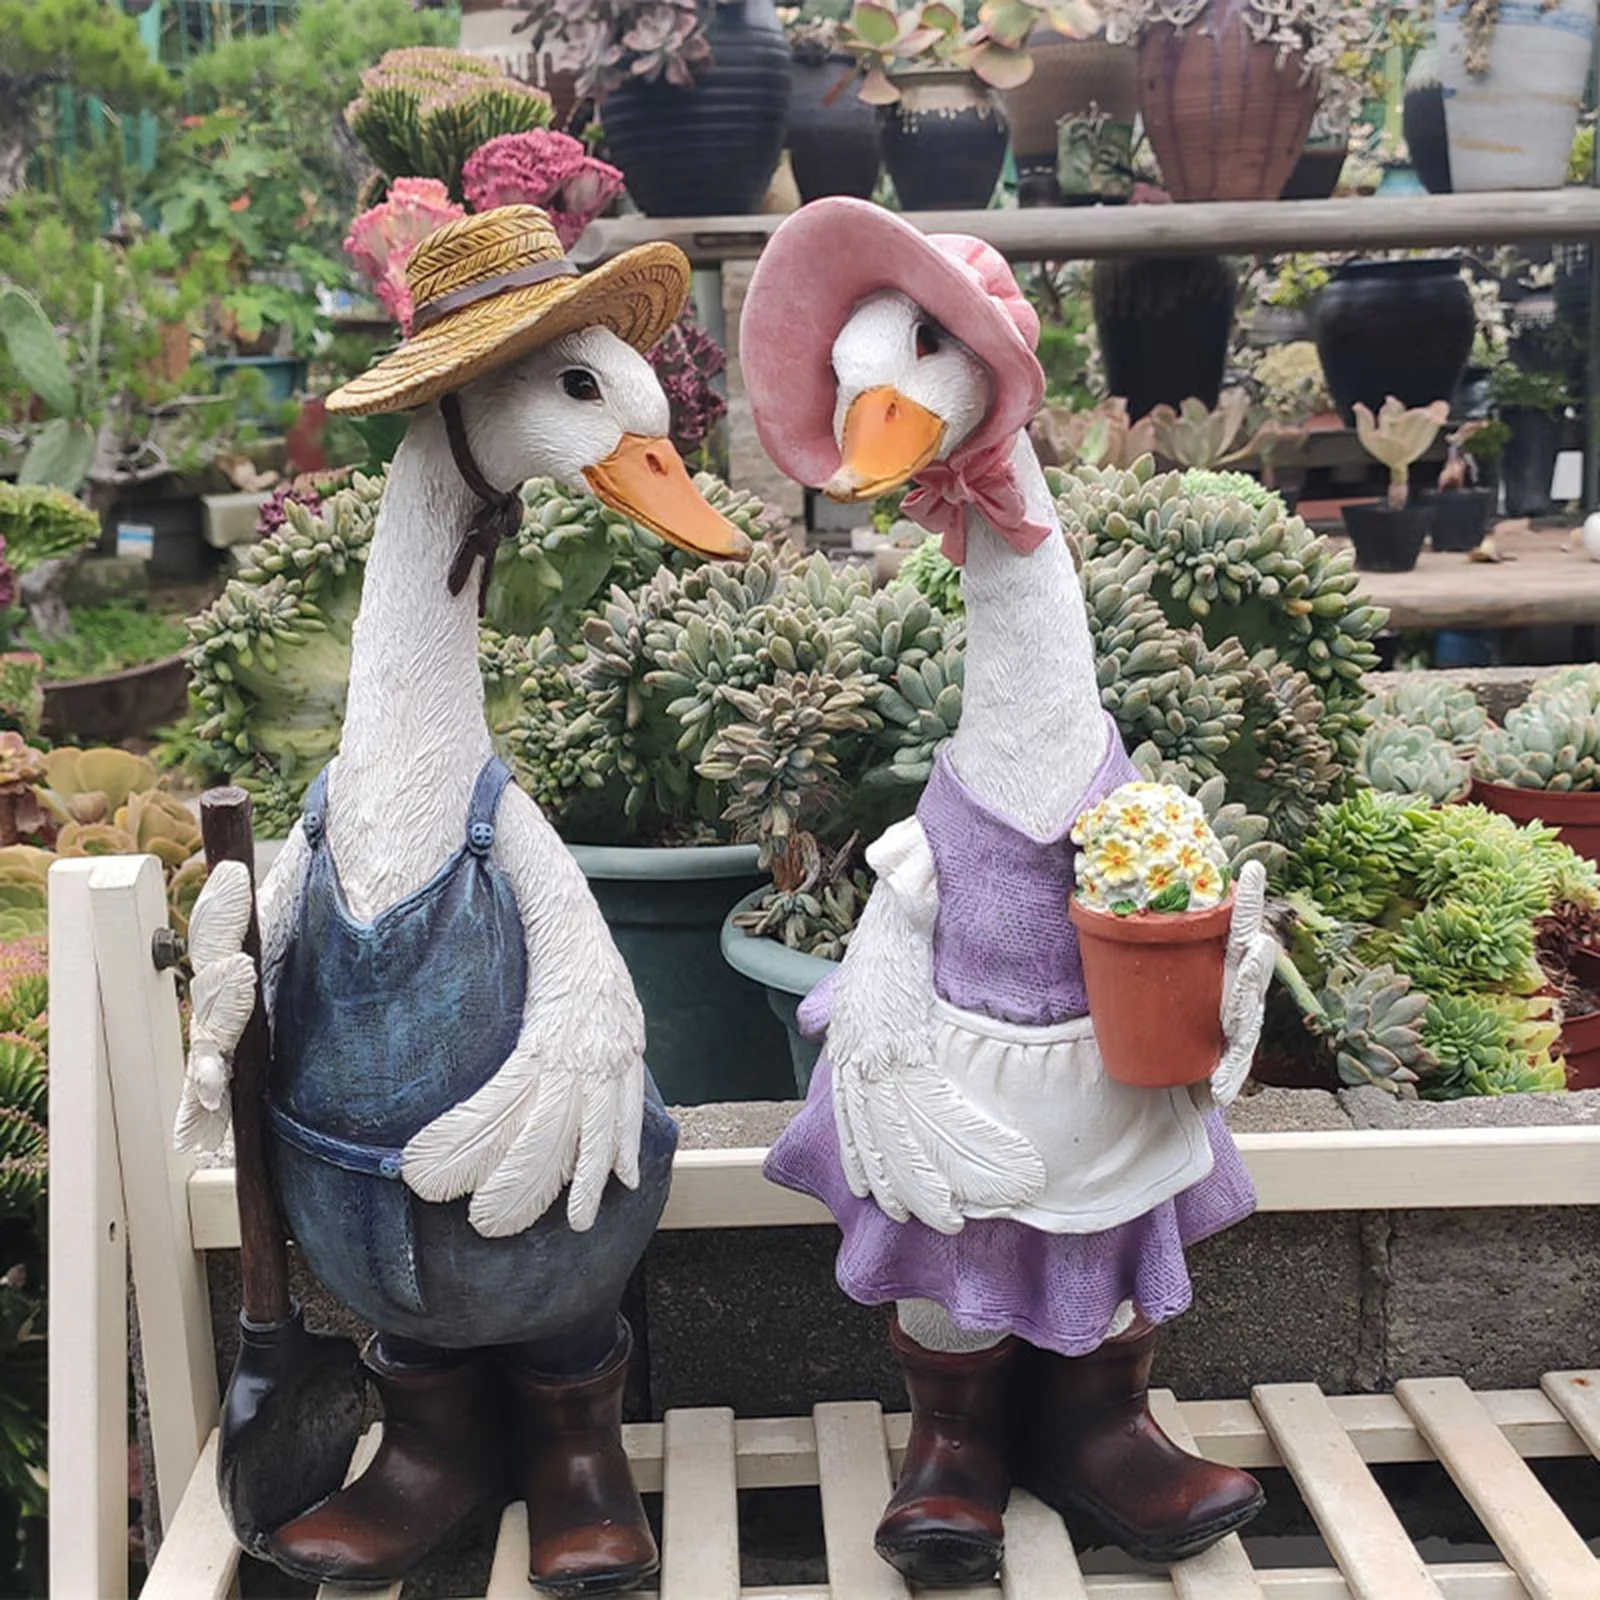 Lawn Decorative Figurine Mini Cute Resin Duck Model Toys Garden Ornaments Art Crafts for Outdoor Courtyard